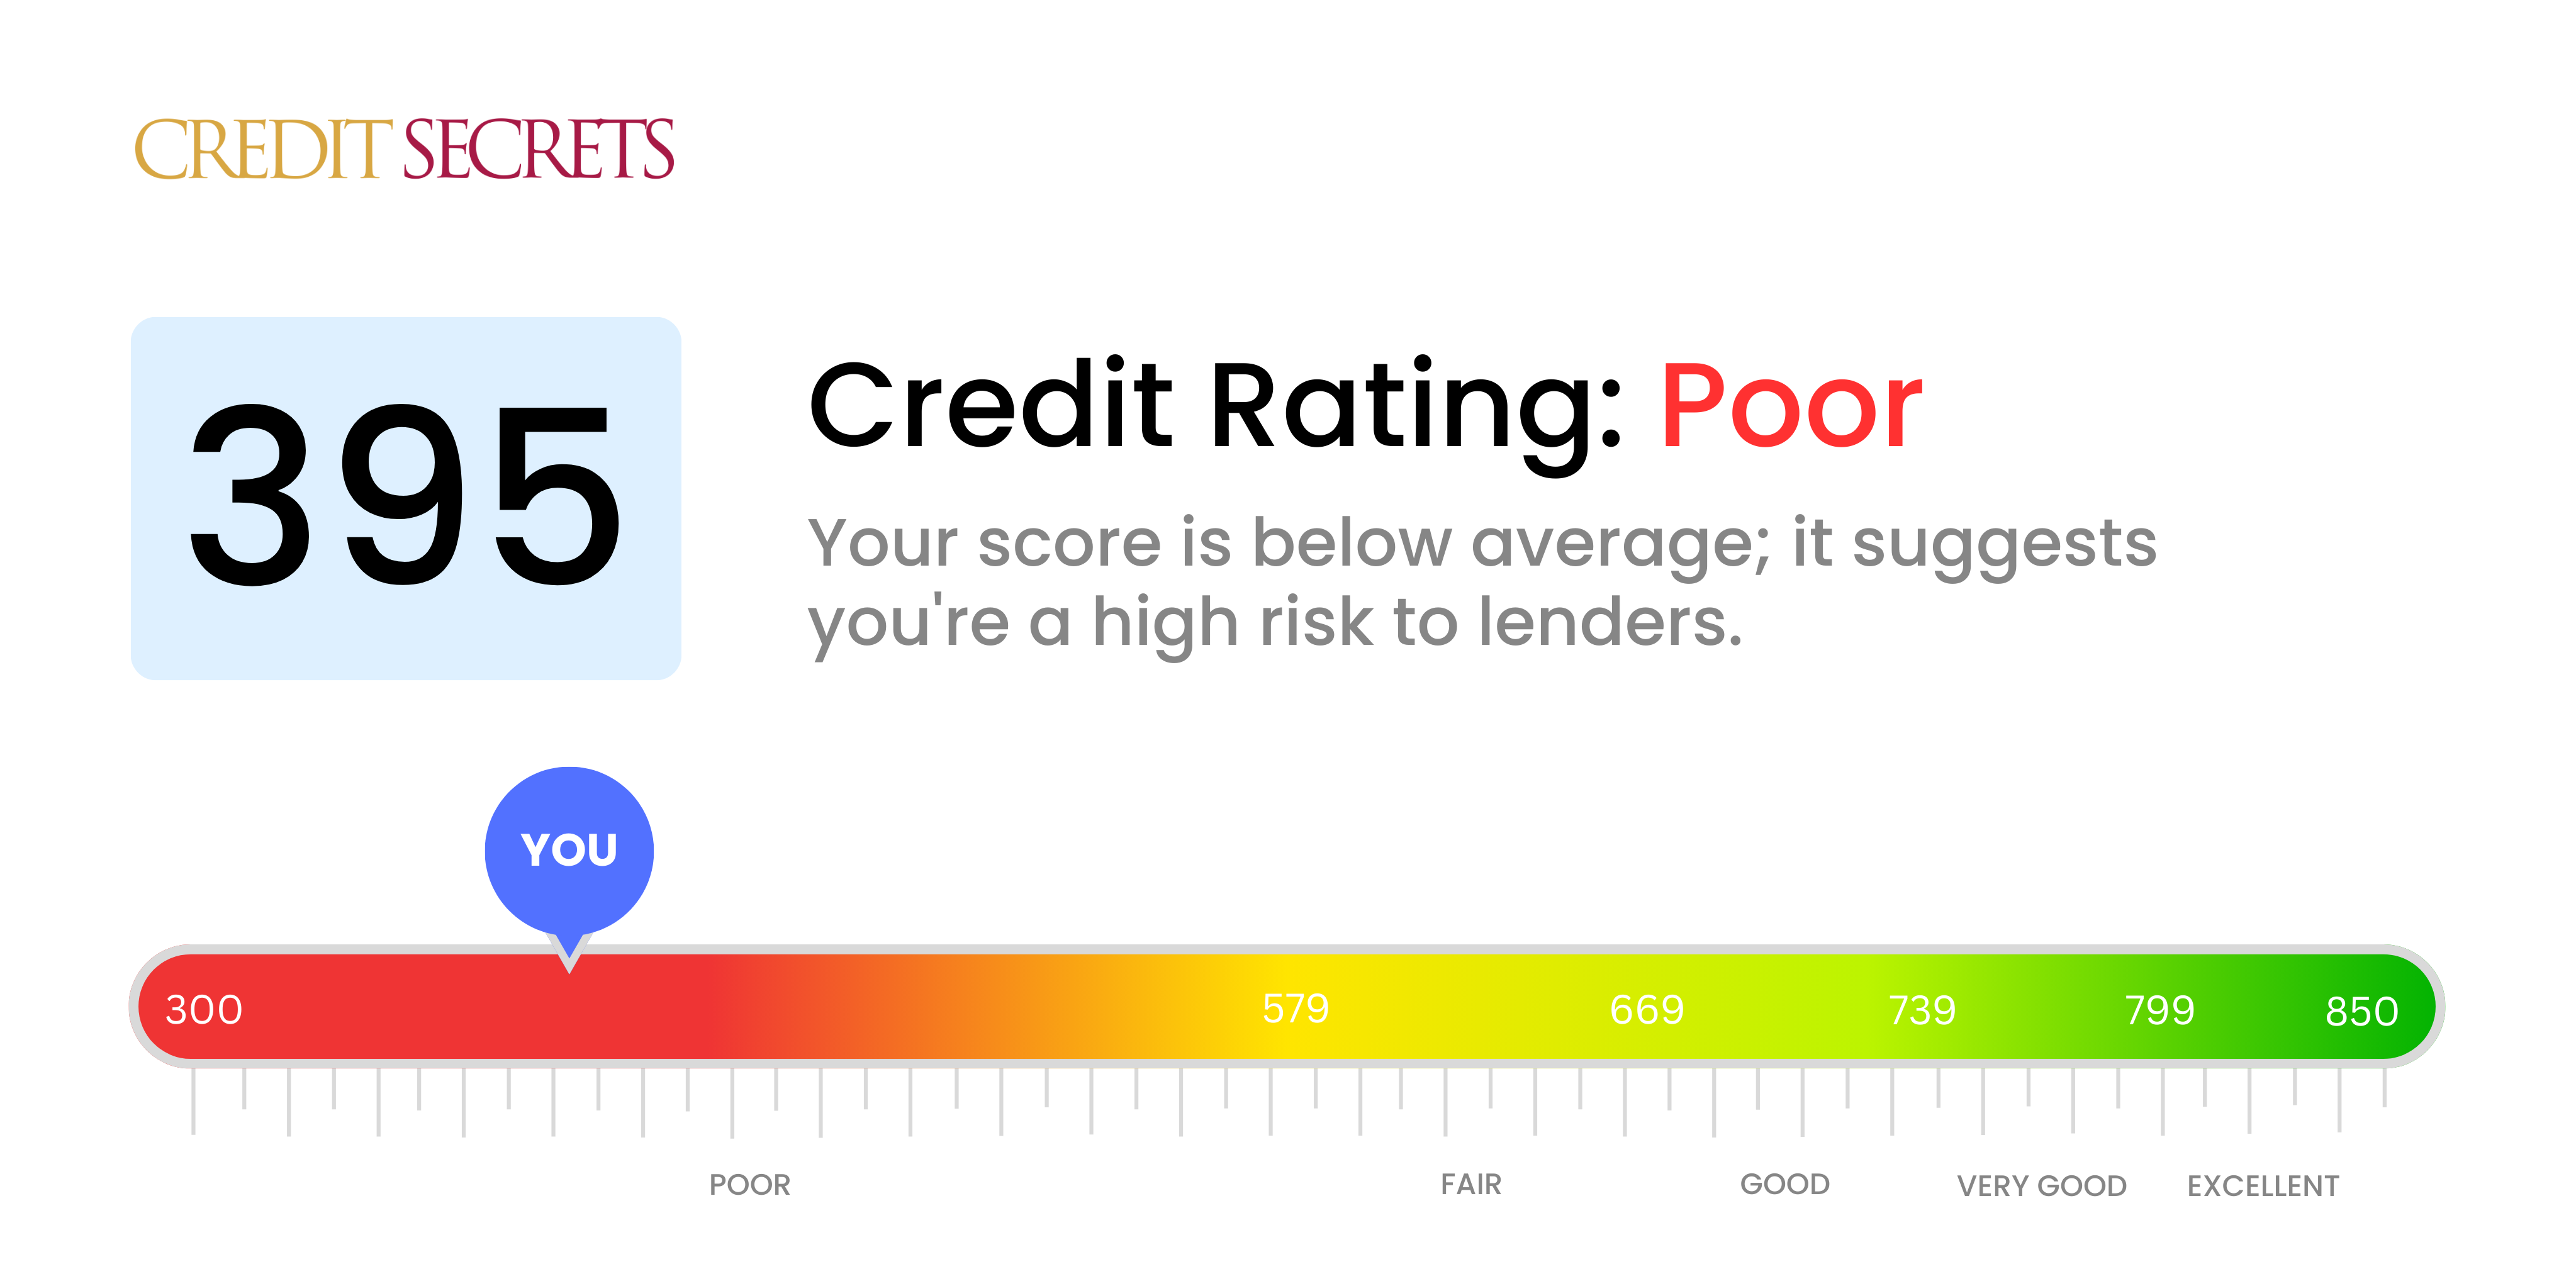 Is 395 a good credit score?